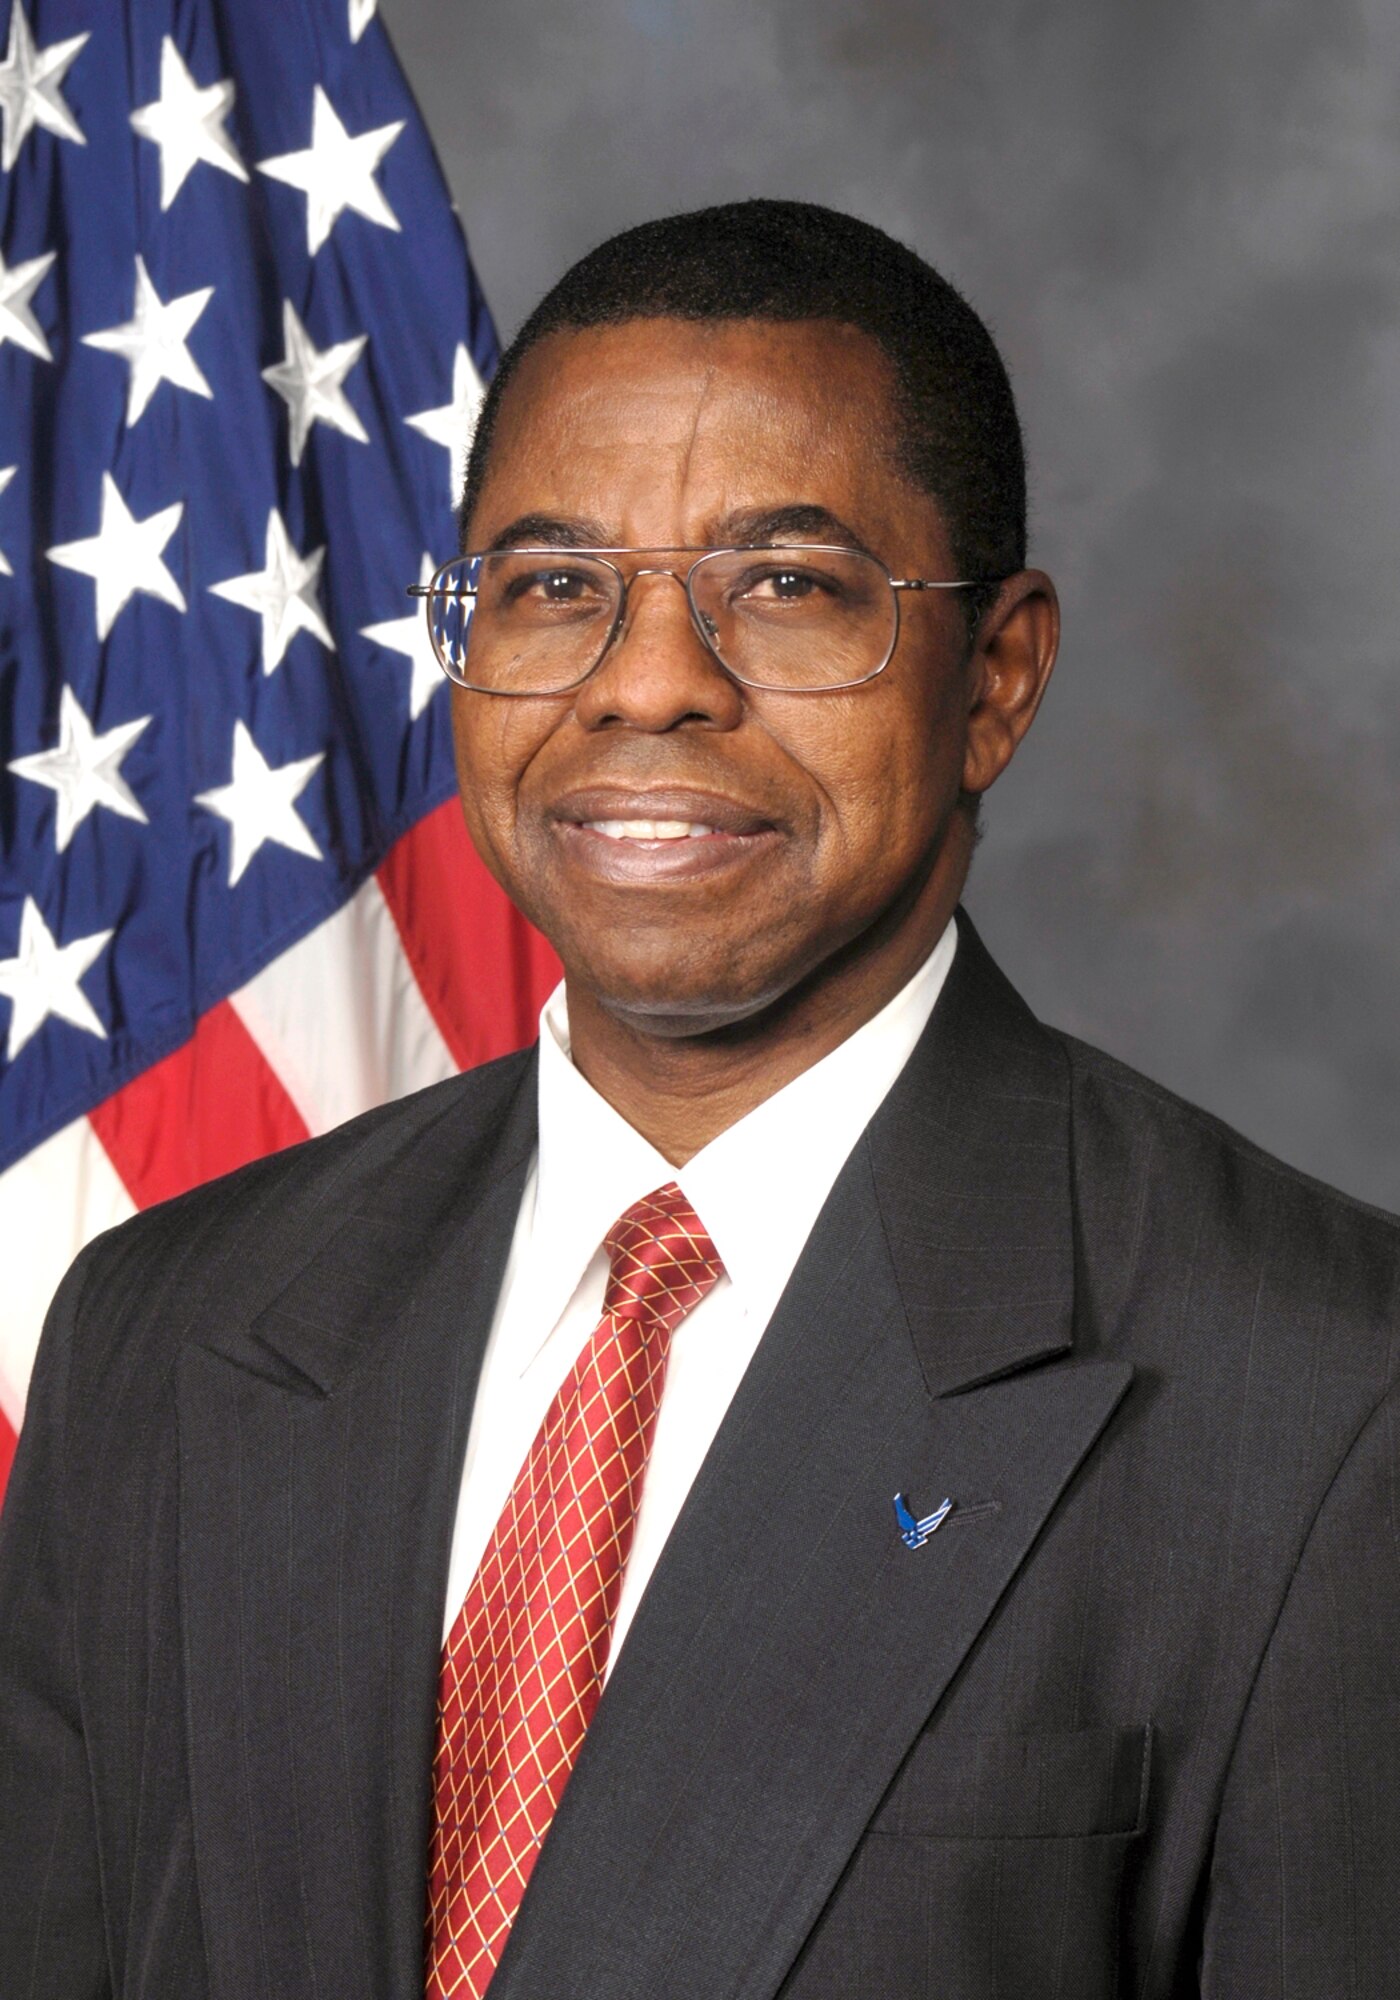 Dr. Adedeji Badiru, dean of the Air Force Institute of Technology’s Graduate School of Engineering and Management, will receive the Career Achievement in Government Award at the 36th BEYA STEM Conference in Feb. 2022. (U.S. Air Force Official Photo)